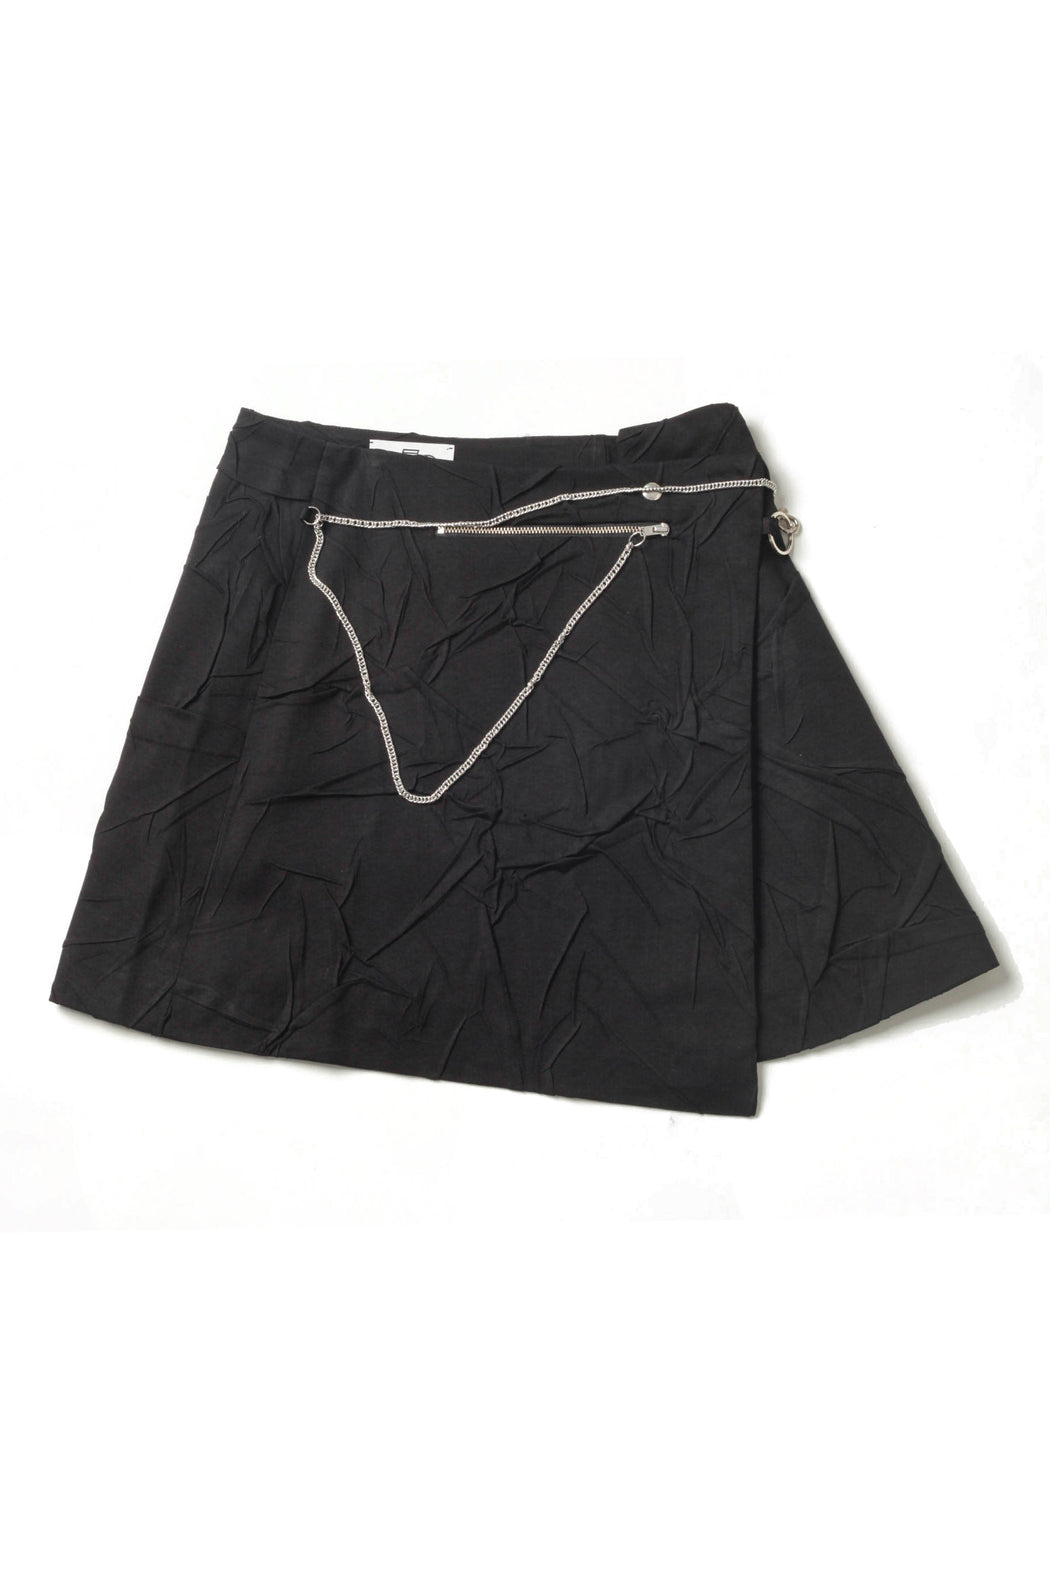 Madou - Black Double Sided Skirt